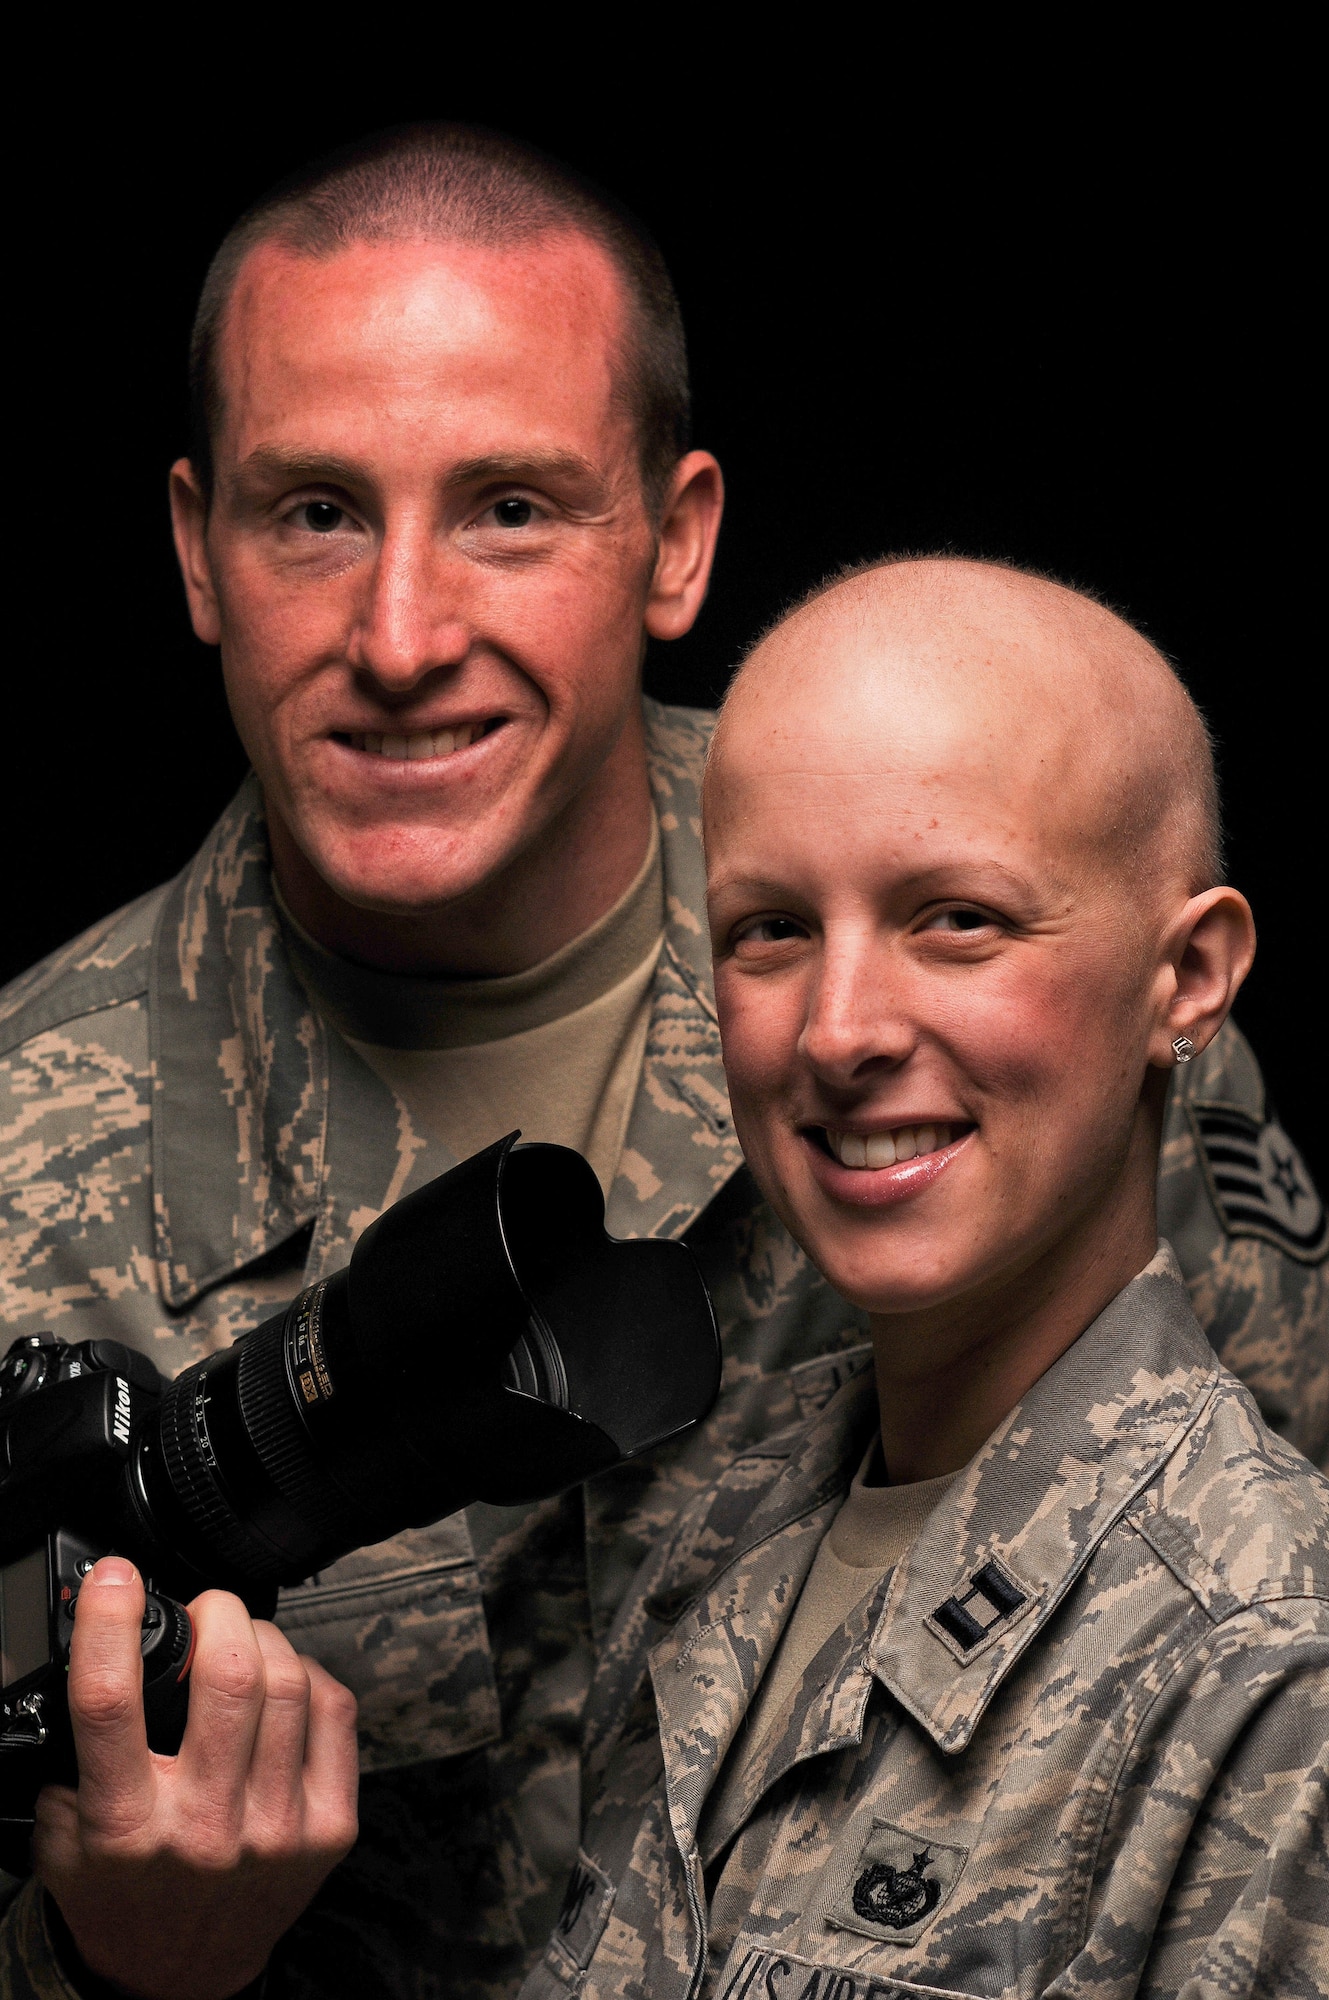 Staff Sgt. Russ Scalf and Capt. Candice Adams Ismirle pose for a studio photo April 8, 2011, at Fort George G. Meade, Md. (U.S. Air Force photo by Master Sgt. Justin Pyle)